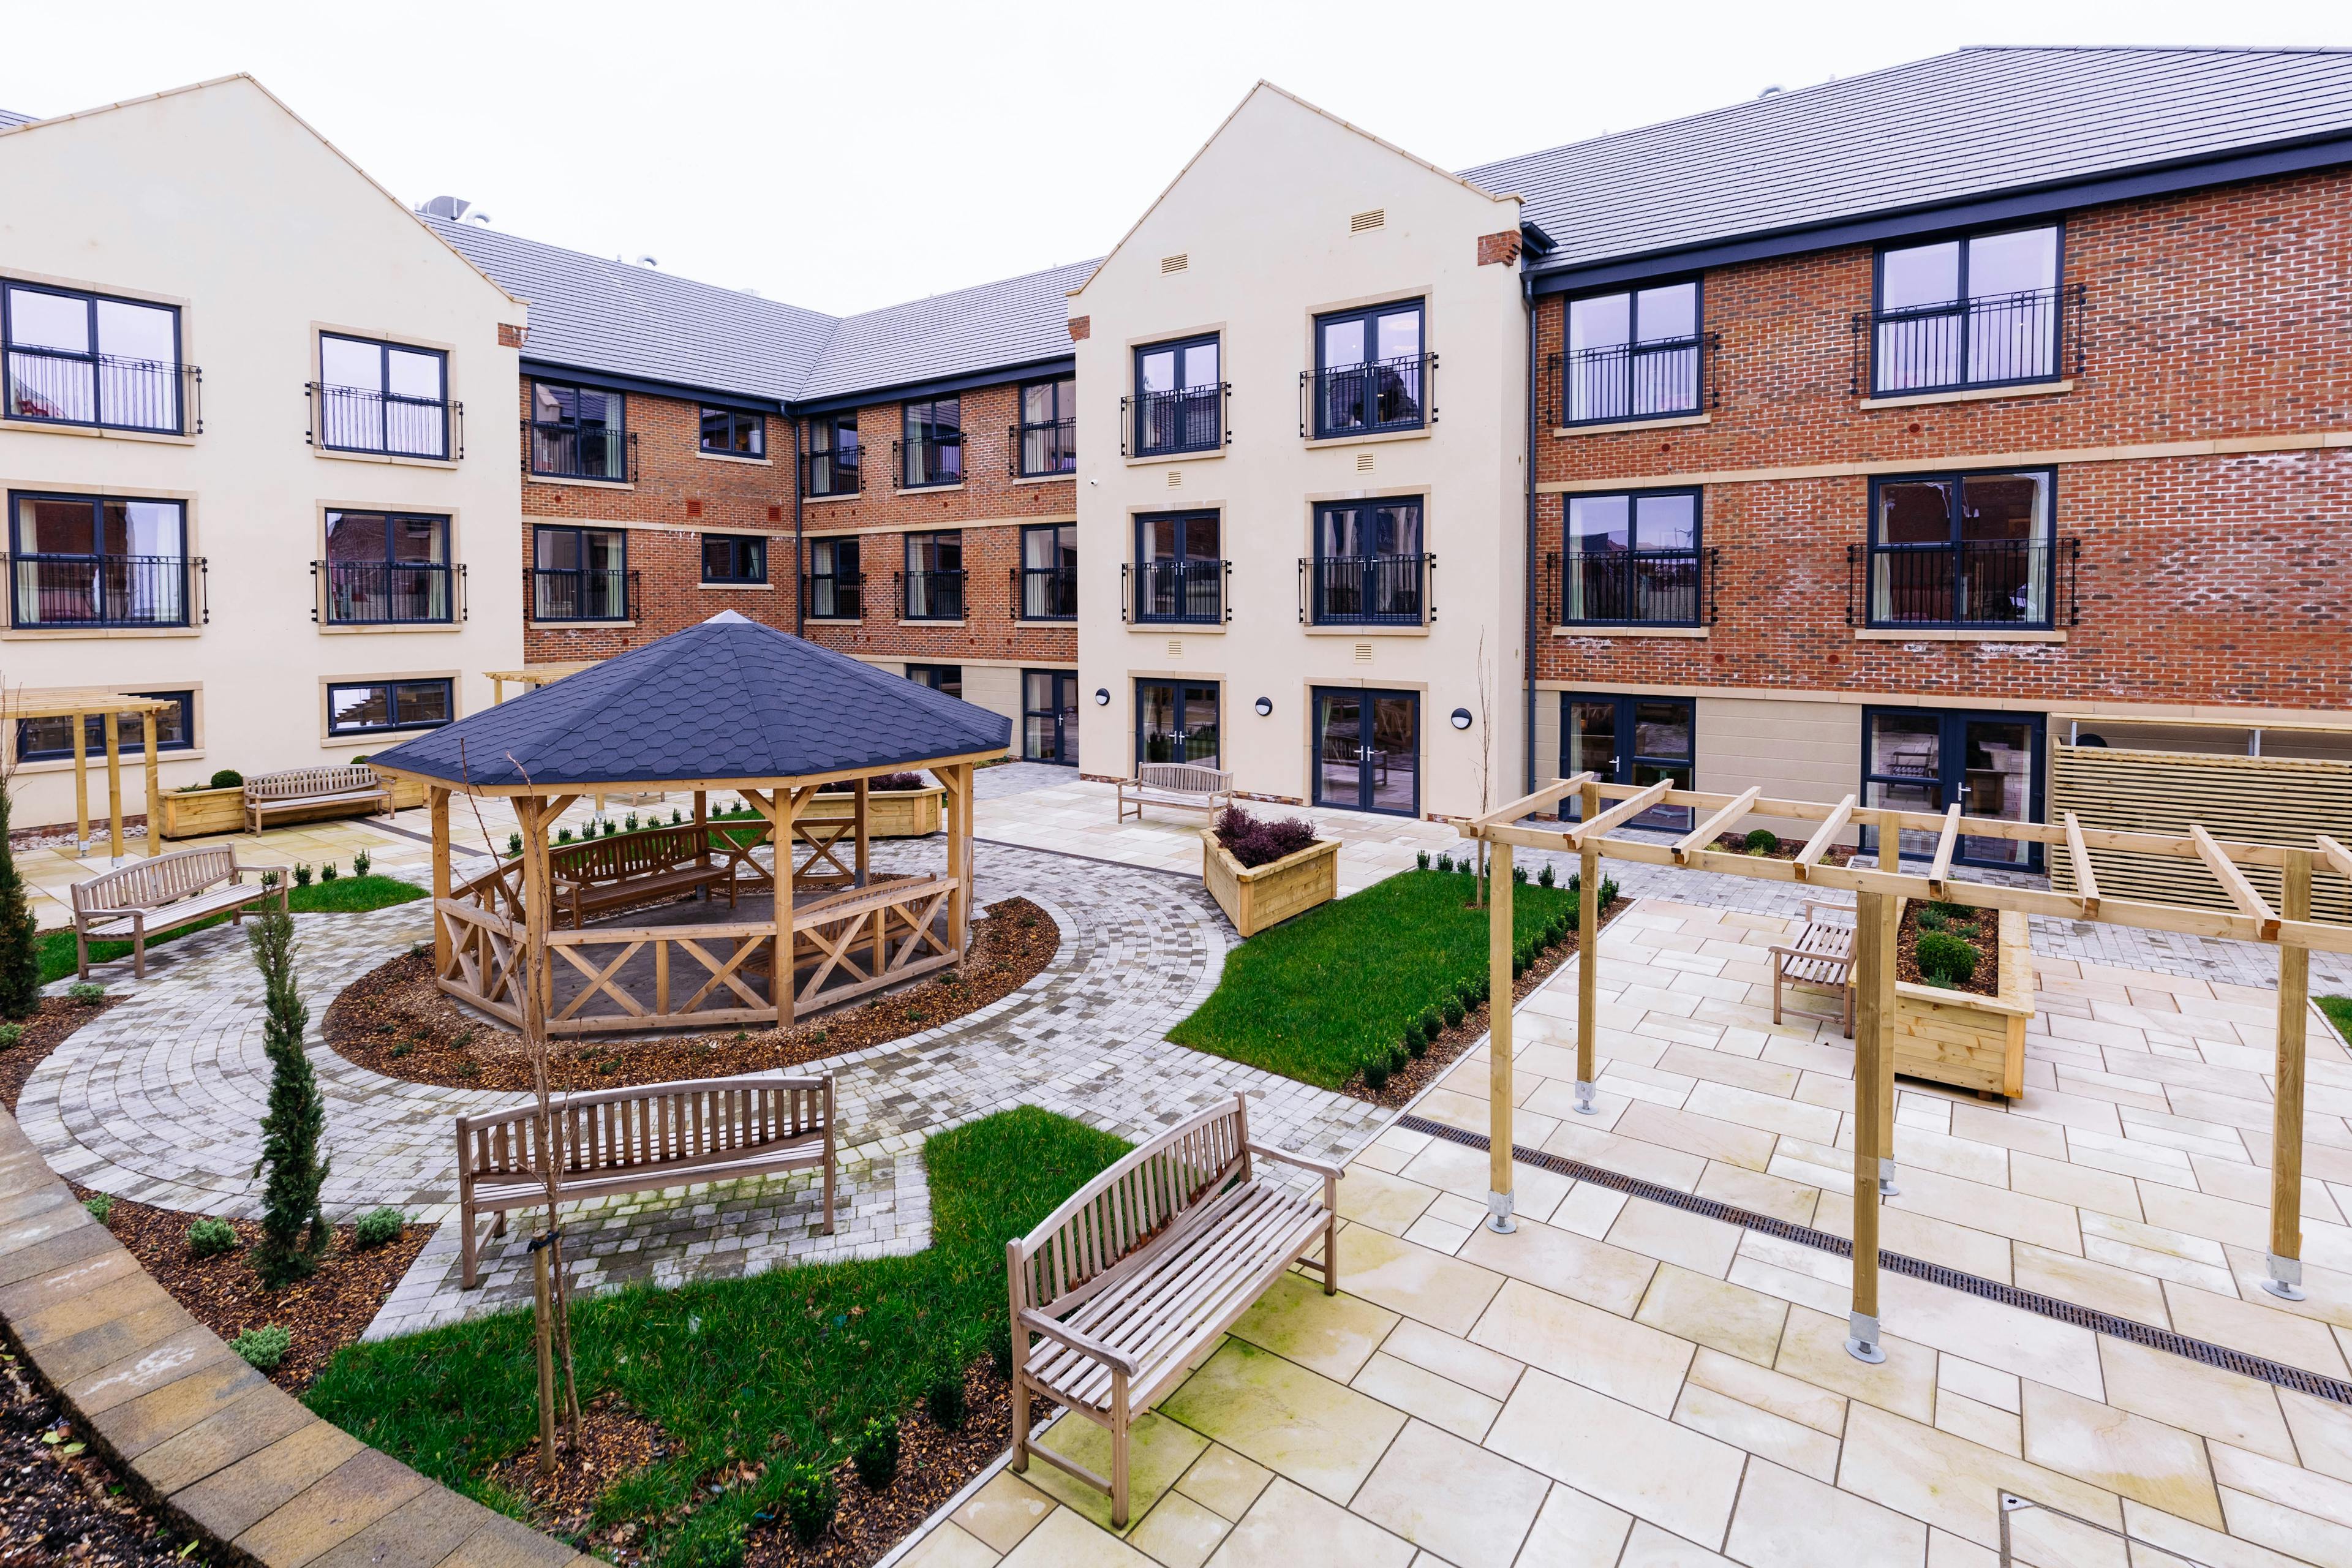 Garden of Upton Bay Care Home in Poole, Dorset